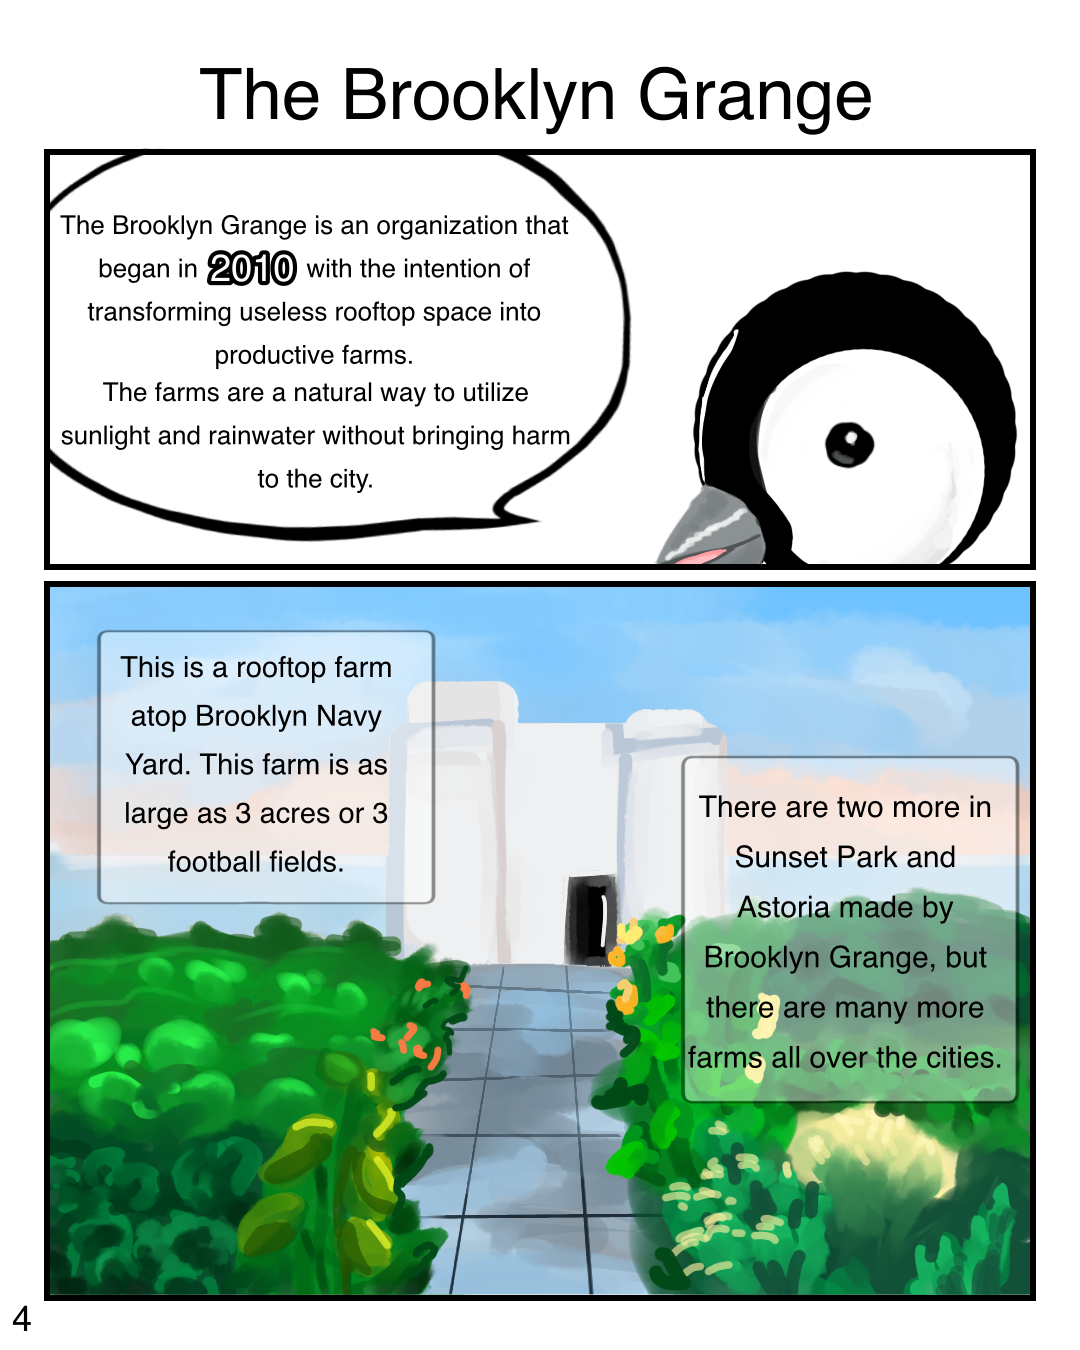 2023_Final_GraphicContest_Edmond Dong_Page 4_03152024.PNG